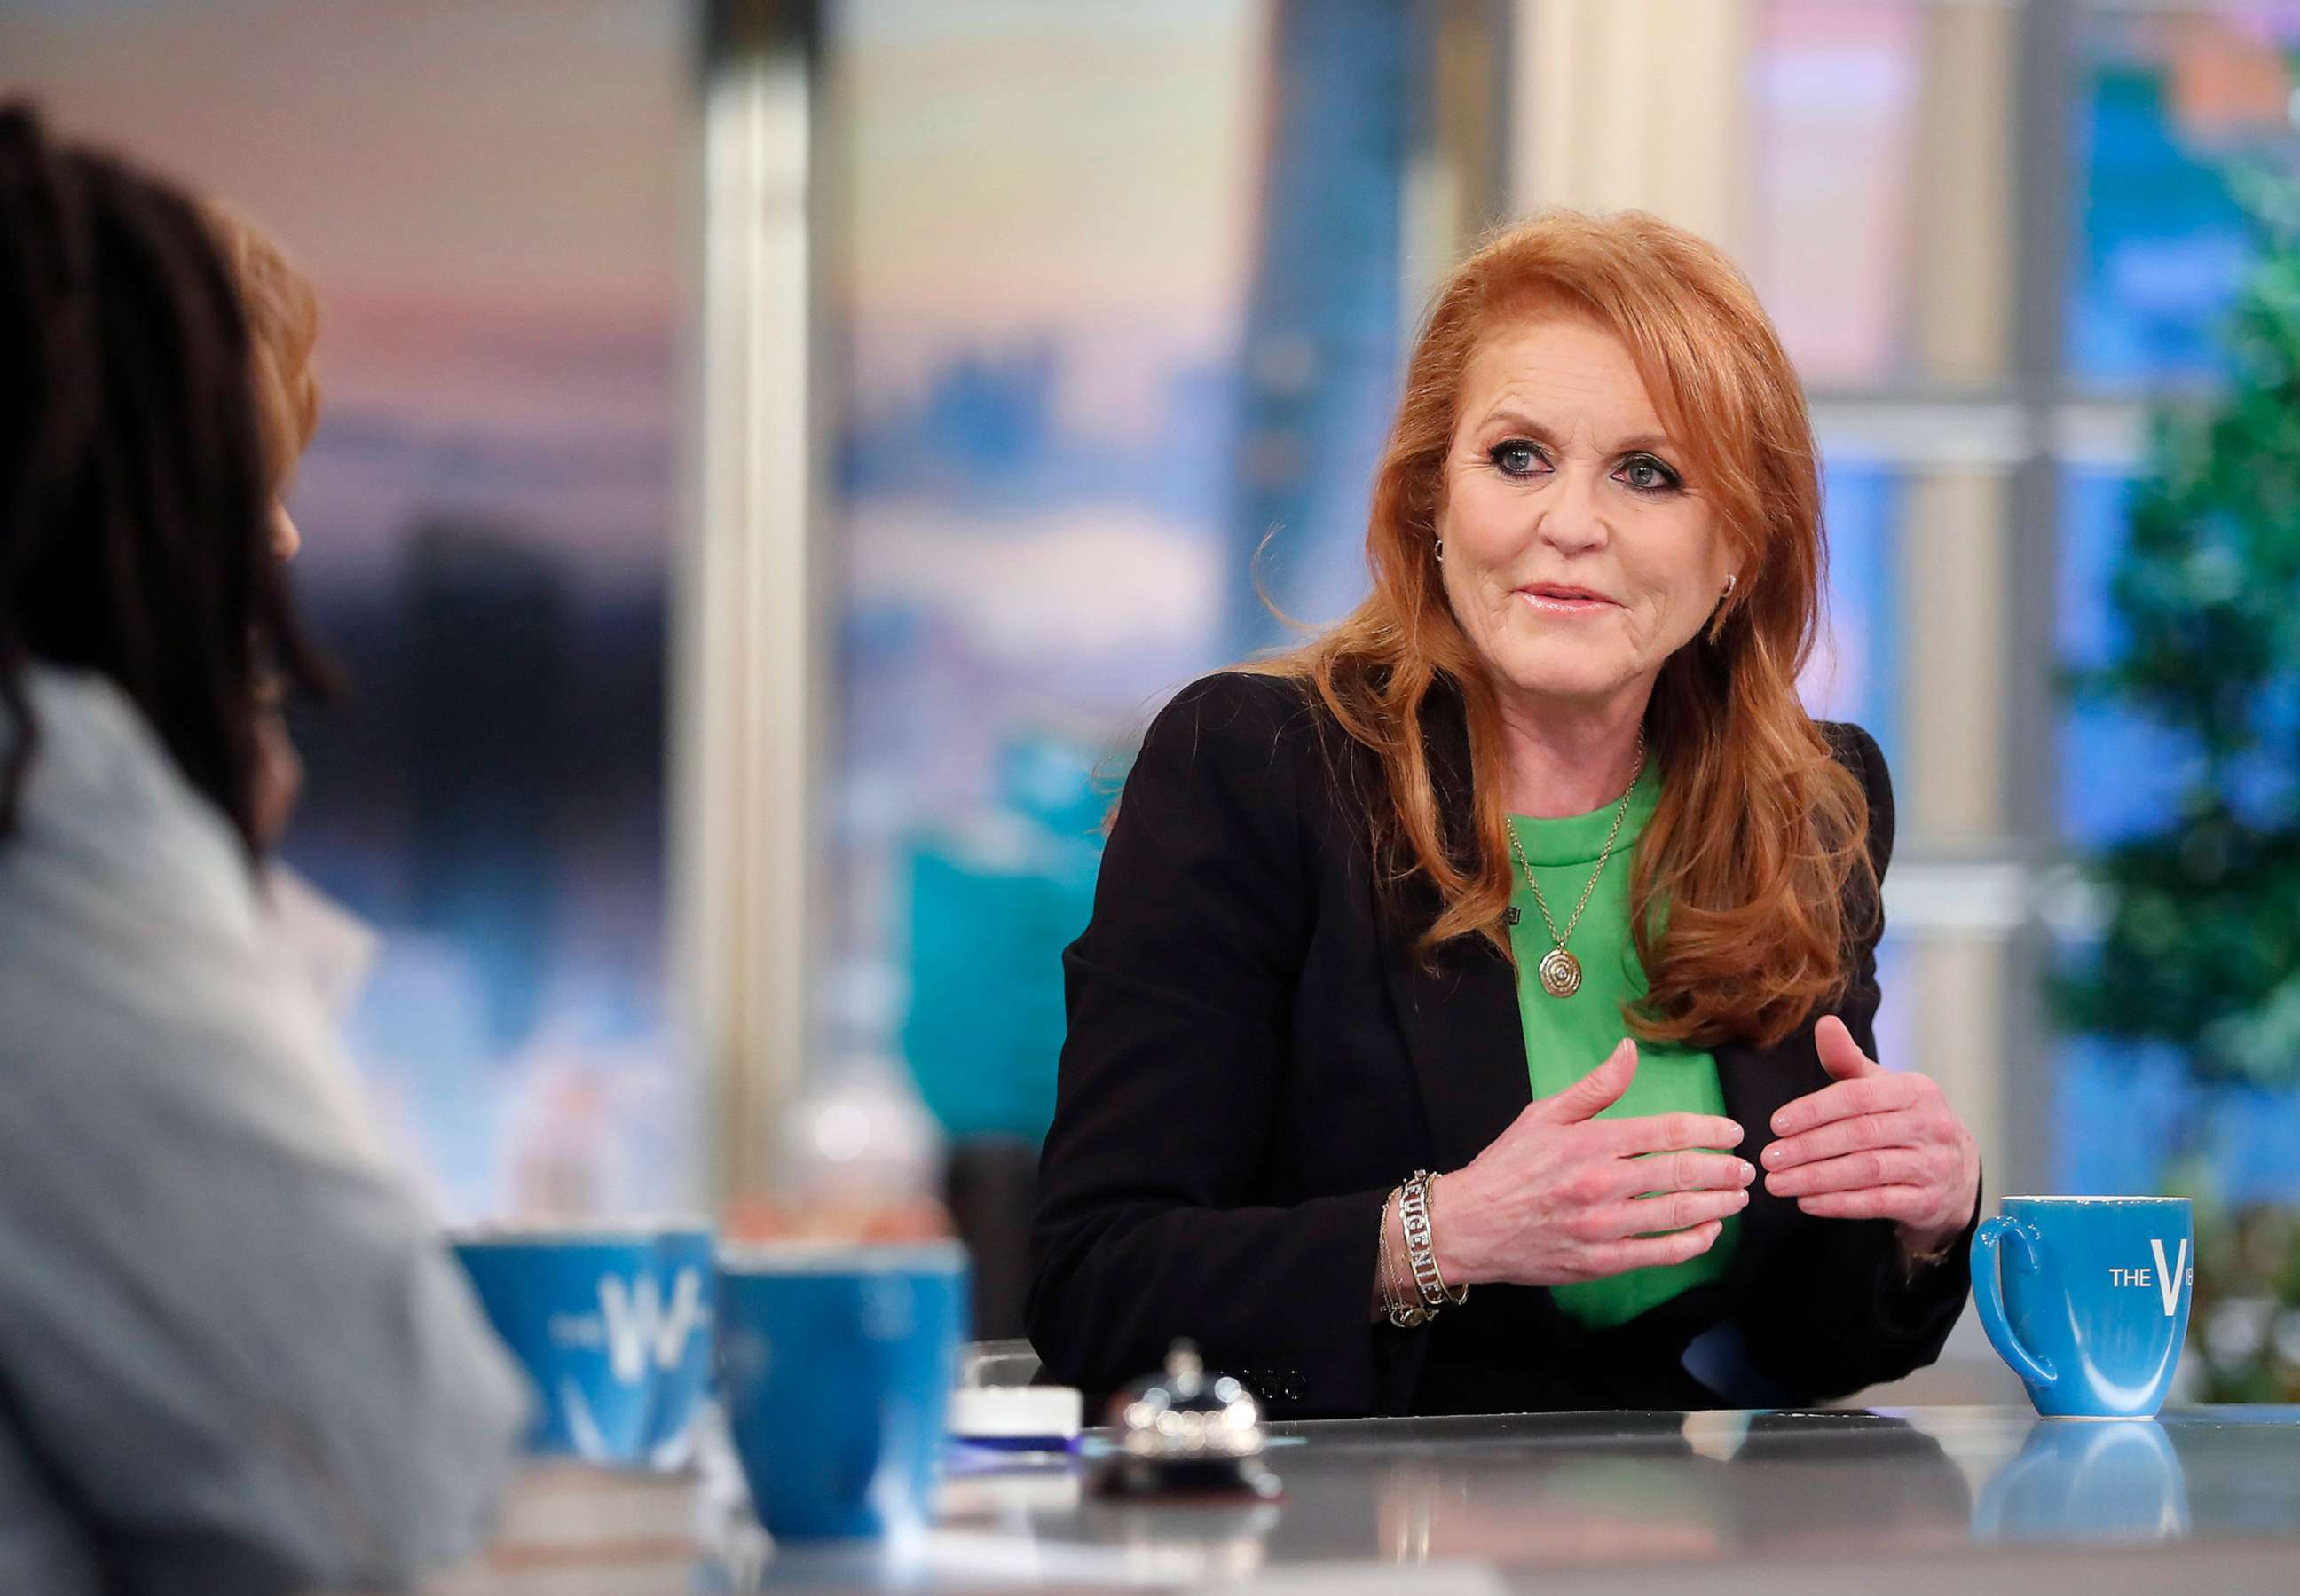 PHOTO: Sarah Ferguson, The Duchess of York during an appearance on ABC's "The View," March 3, 2023.